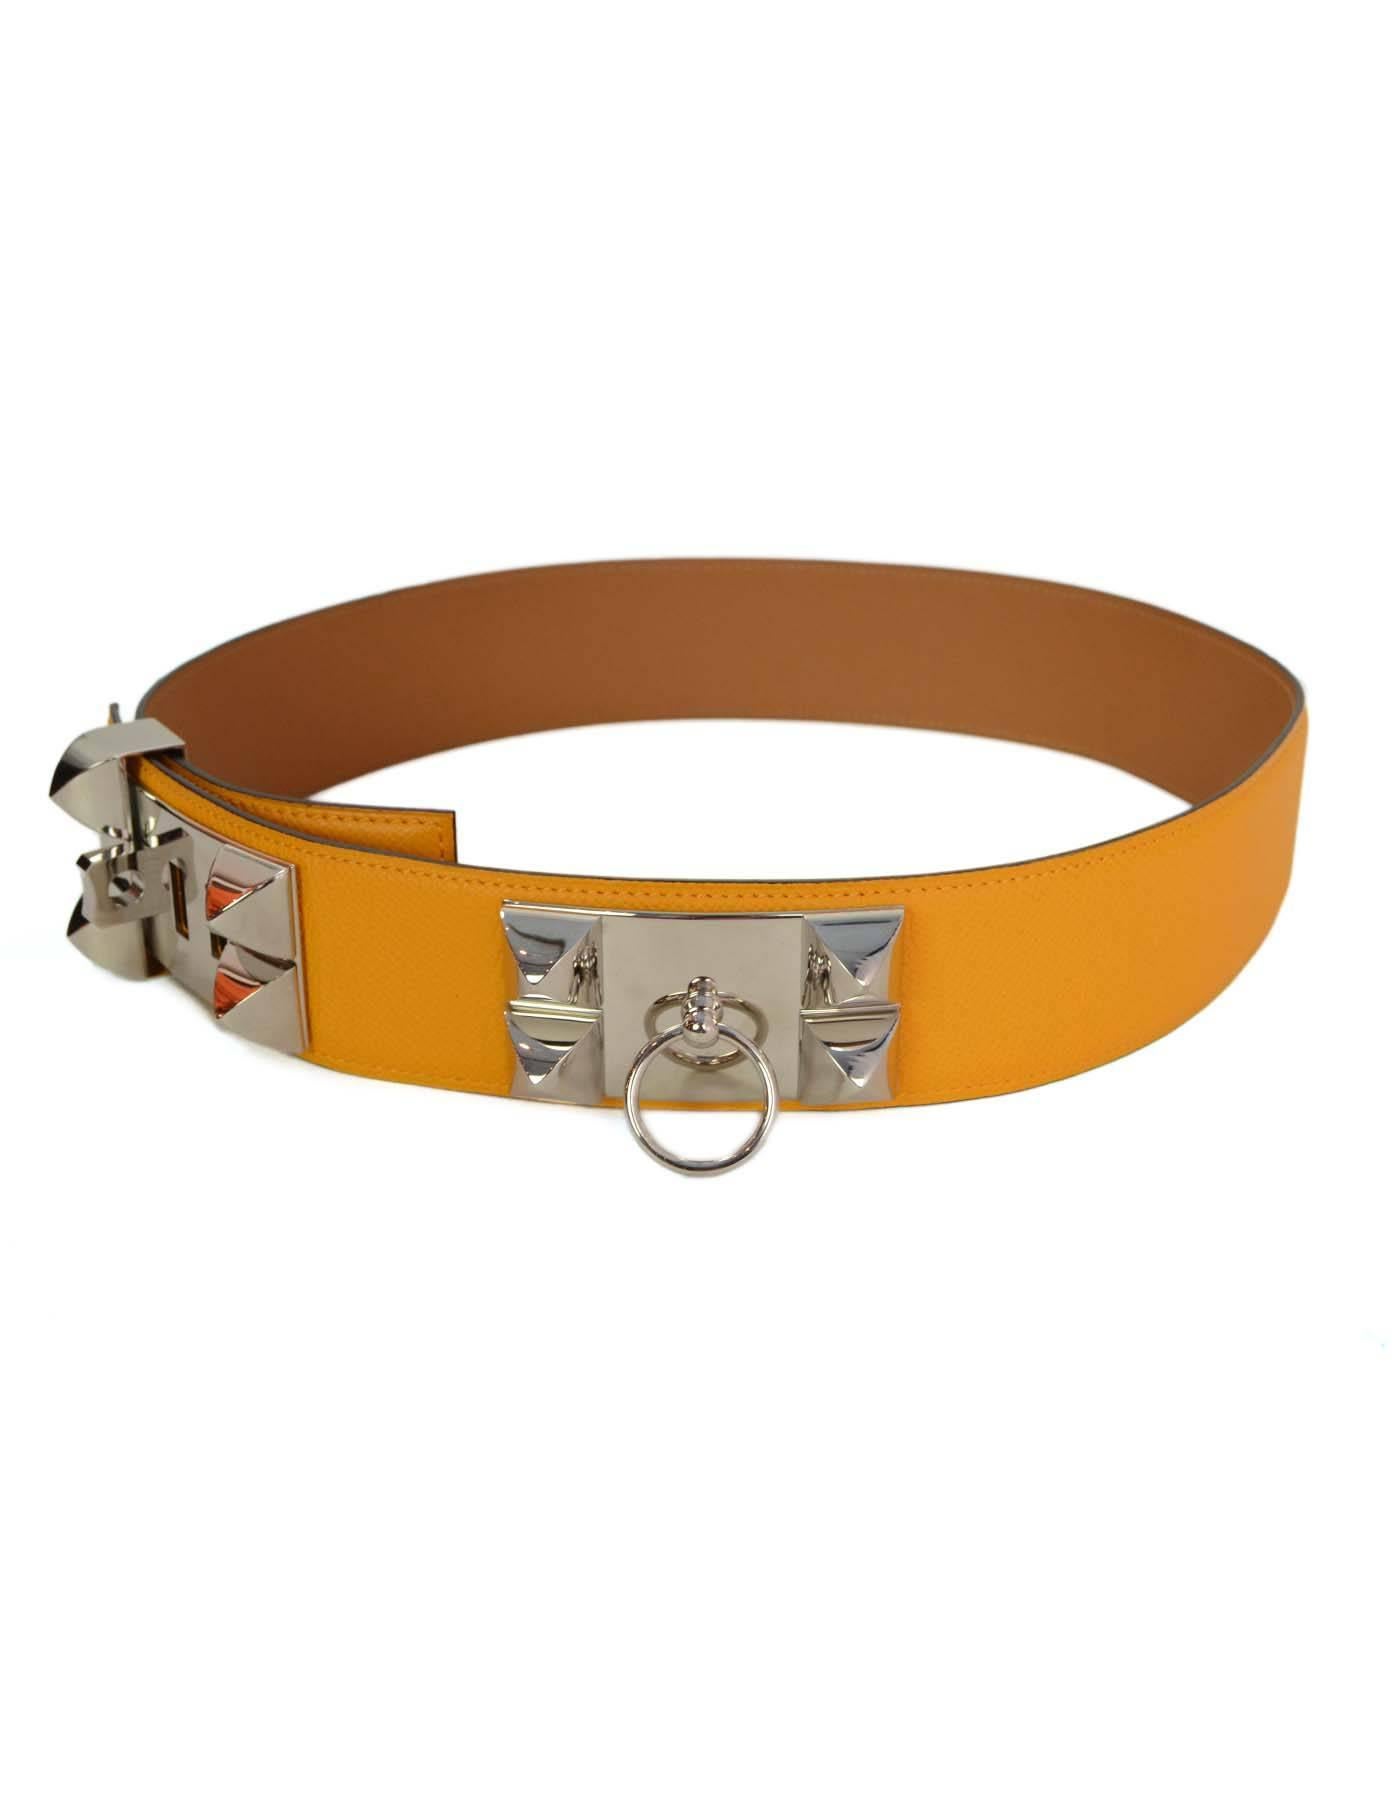 Hermes Yellow Epsom CDC Belt

Made in: France
Year of Production: 2012
Color: Yellow
Materials: Epsom leather and Palladium plated hardware
Closure: Stud and notch closure (with five adjustable notches)
Stamp: P stamp in square
Retail Price: $2,350